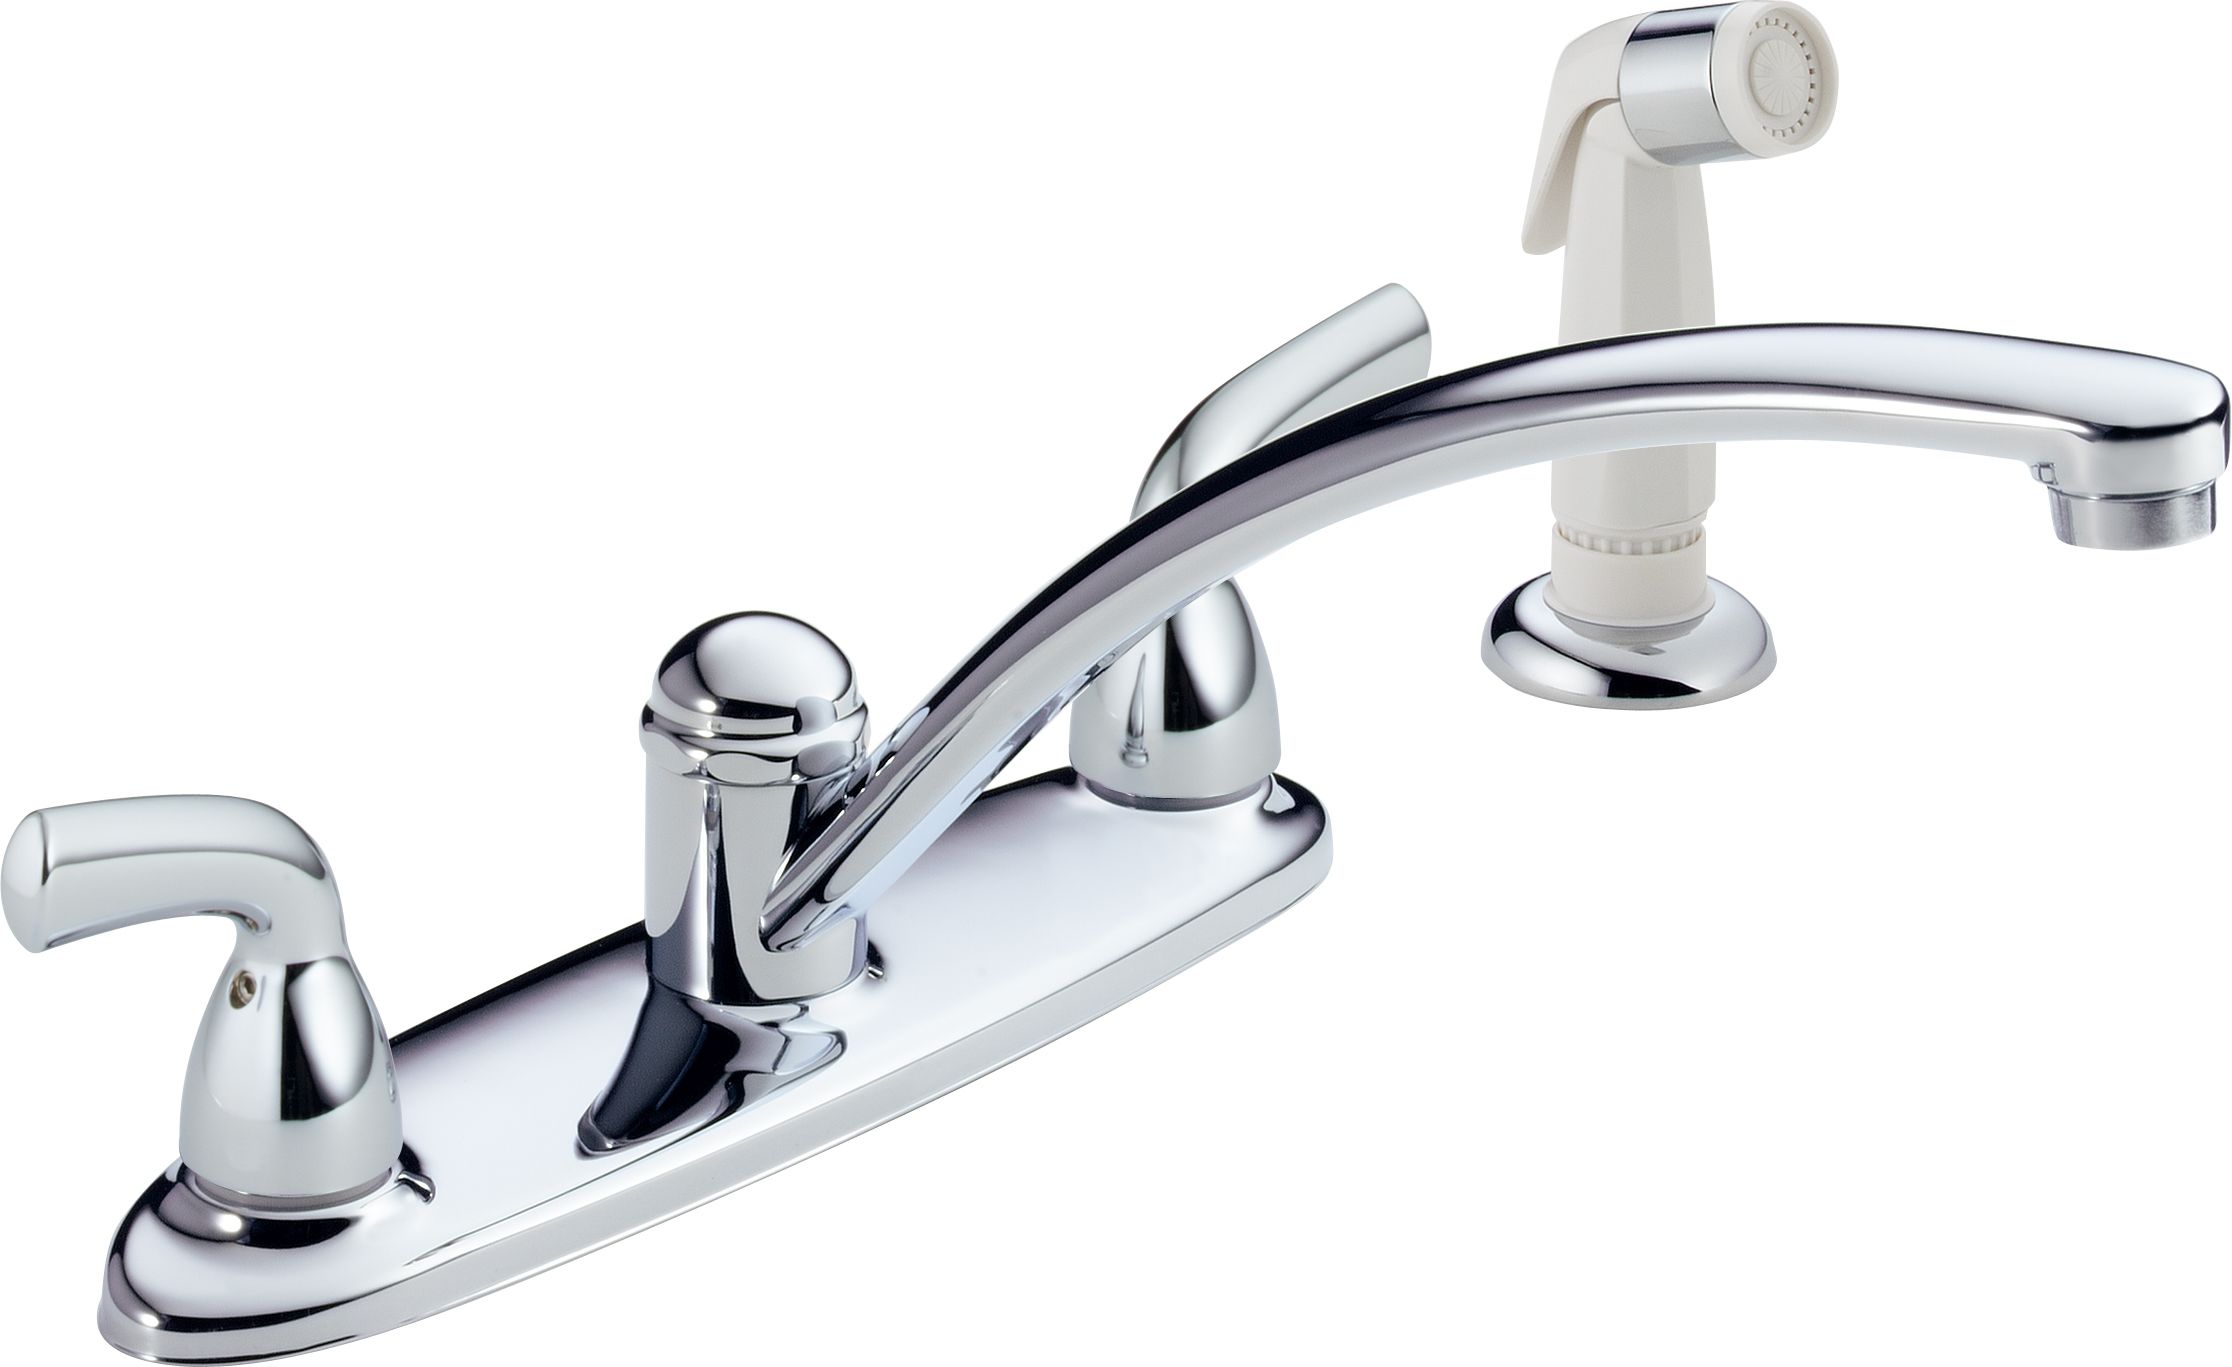 Delta B2410lf Chrome Foundations Kitchen Faucet With Side Spray Includes Lifetime Warranty Faucetdirect Com